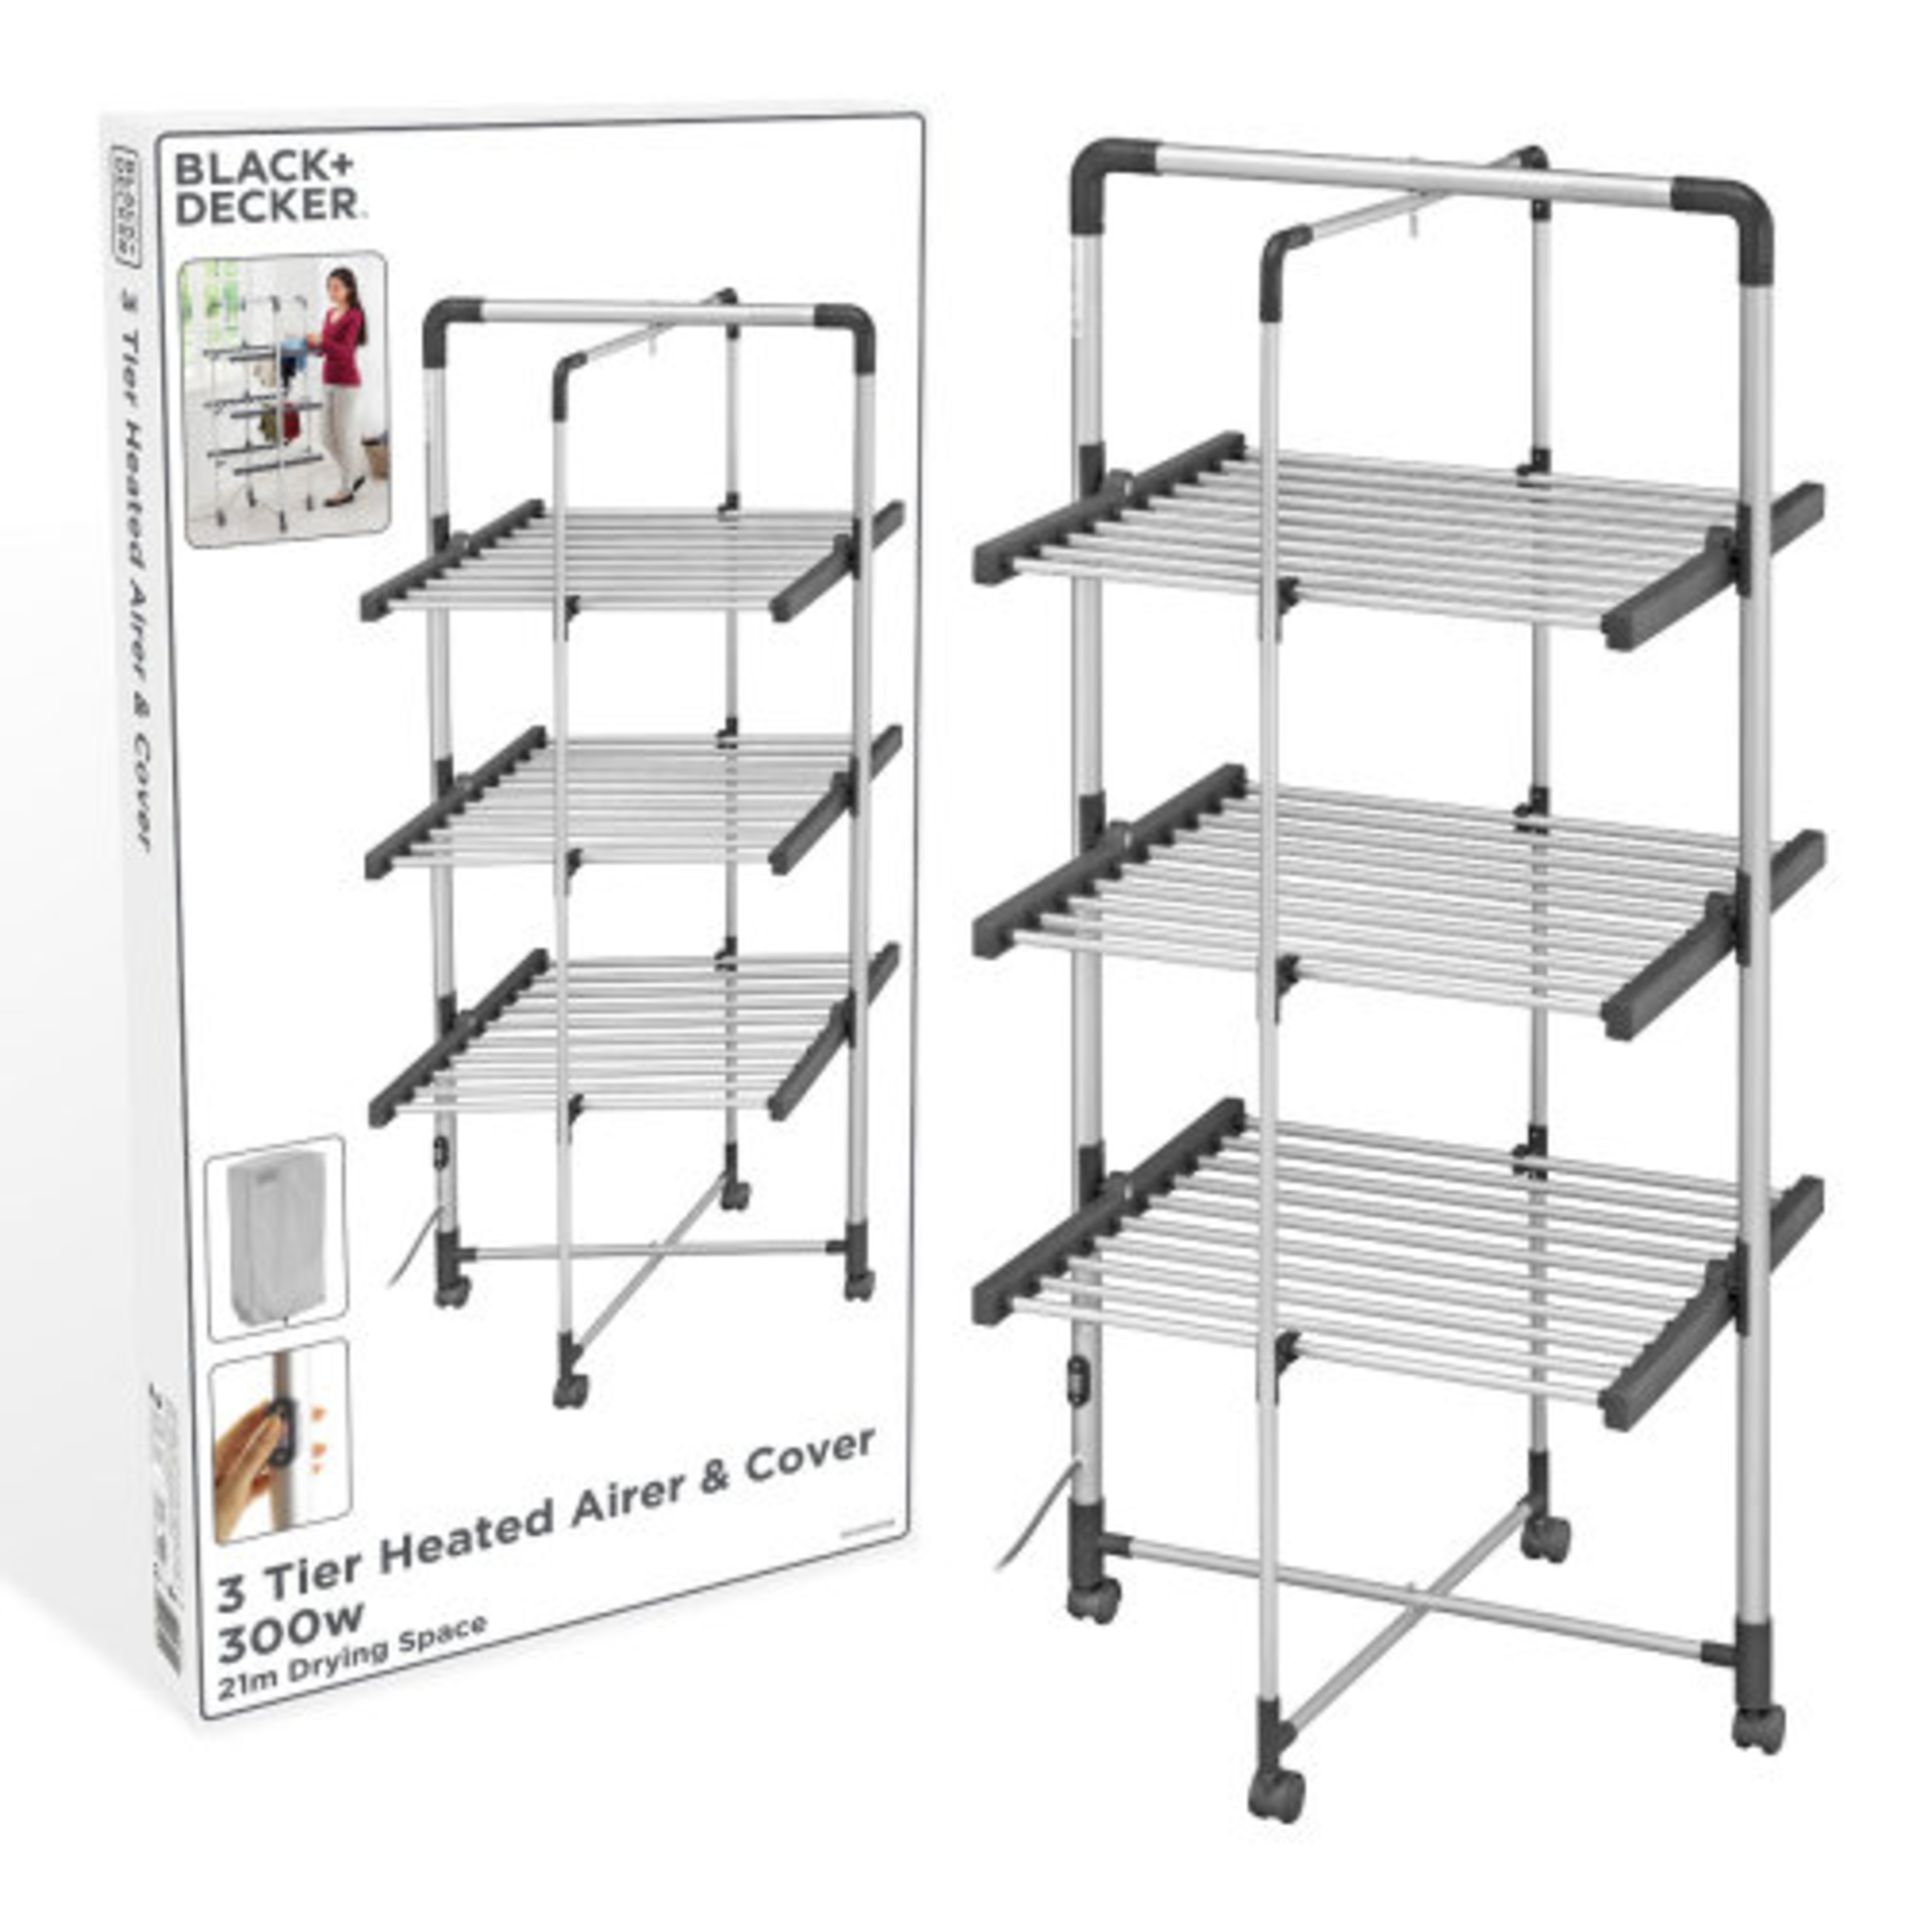 1 BLACK AND DECKER 3-TIER ELECTRIC HEATED AIRER RRP Â£199 (PICTURES FOR ILLUSTRATION PURPOSES ONLY)